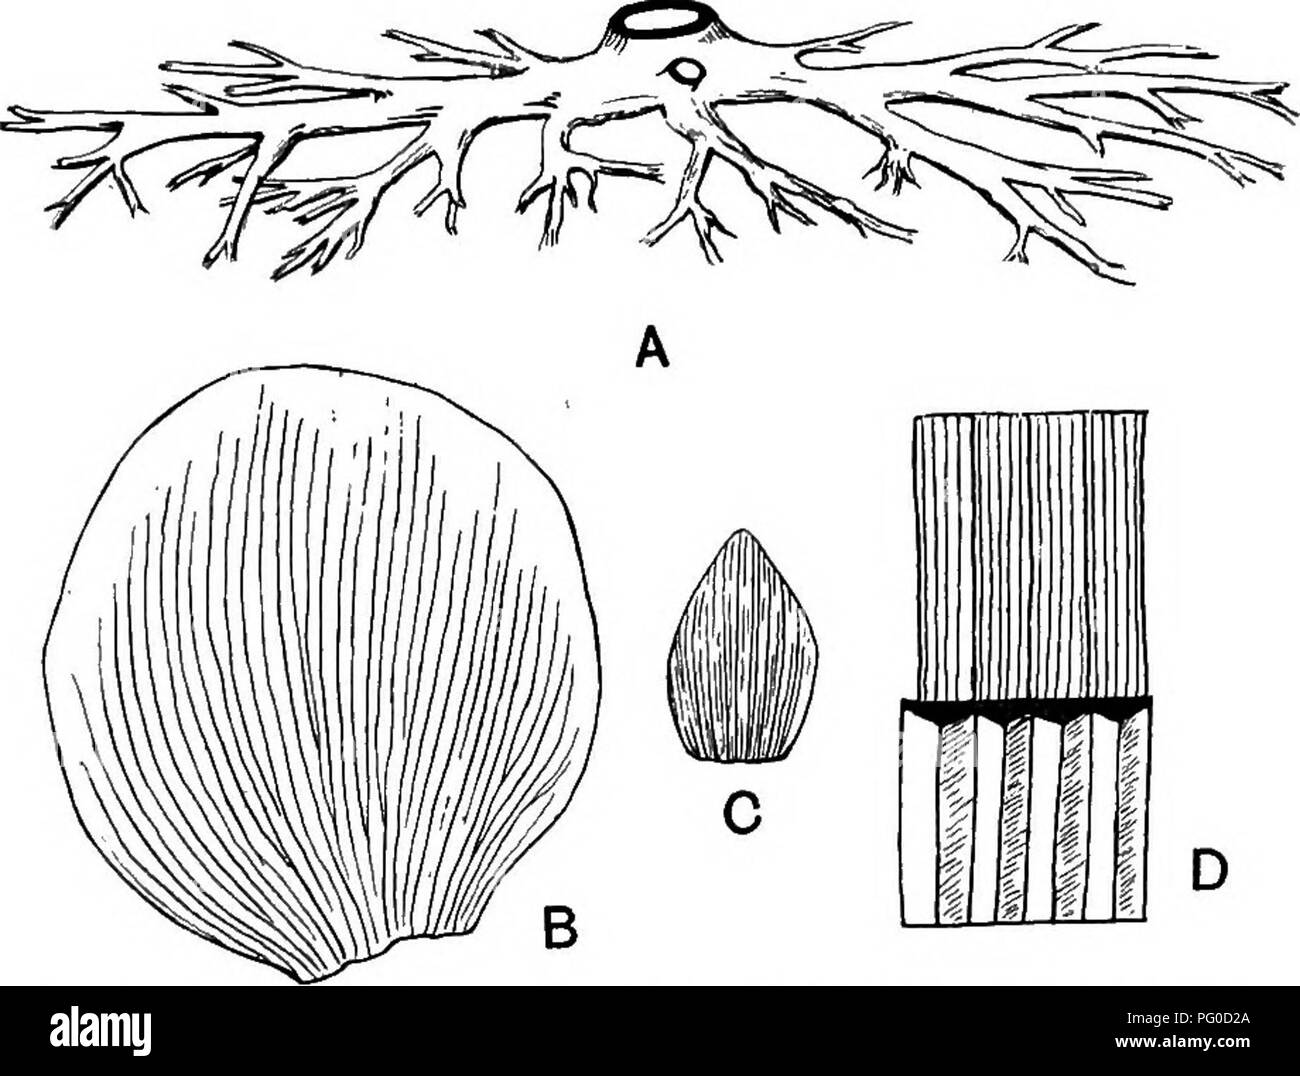 . Fossil plants : for students of botany and geology . Paleobotany. xxxni] CORDAITES 237 may be made to Cordaites circularis Grand'Eury^ from Gard (fig. 468, B) and a smaller leaf from the same locality compared with C. Lacoei (fig. 468, C) Lesq. Cordaites circularis is characterised by the almost orbicular lamina traversed by sHghtly spreading veins; it recalls some of the larger Cyclopteris pinnules of Pterido- sperm fronds and is indistinguishable from some leaves assigned to the genus Dolerophyllum^.. Pig. 468. A, Cordaites root-system {Bhizo-Gordaites); B, Cordaites circularis leai; C, Co Stock Photo